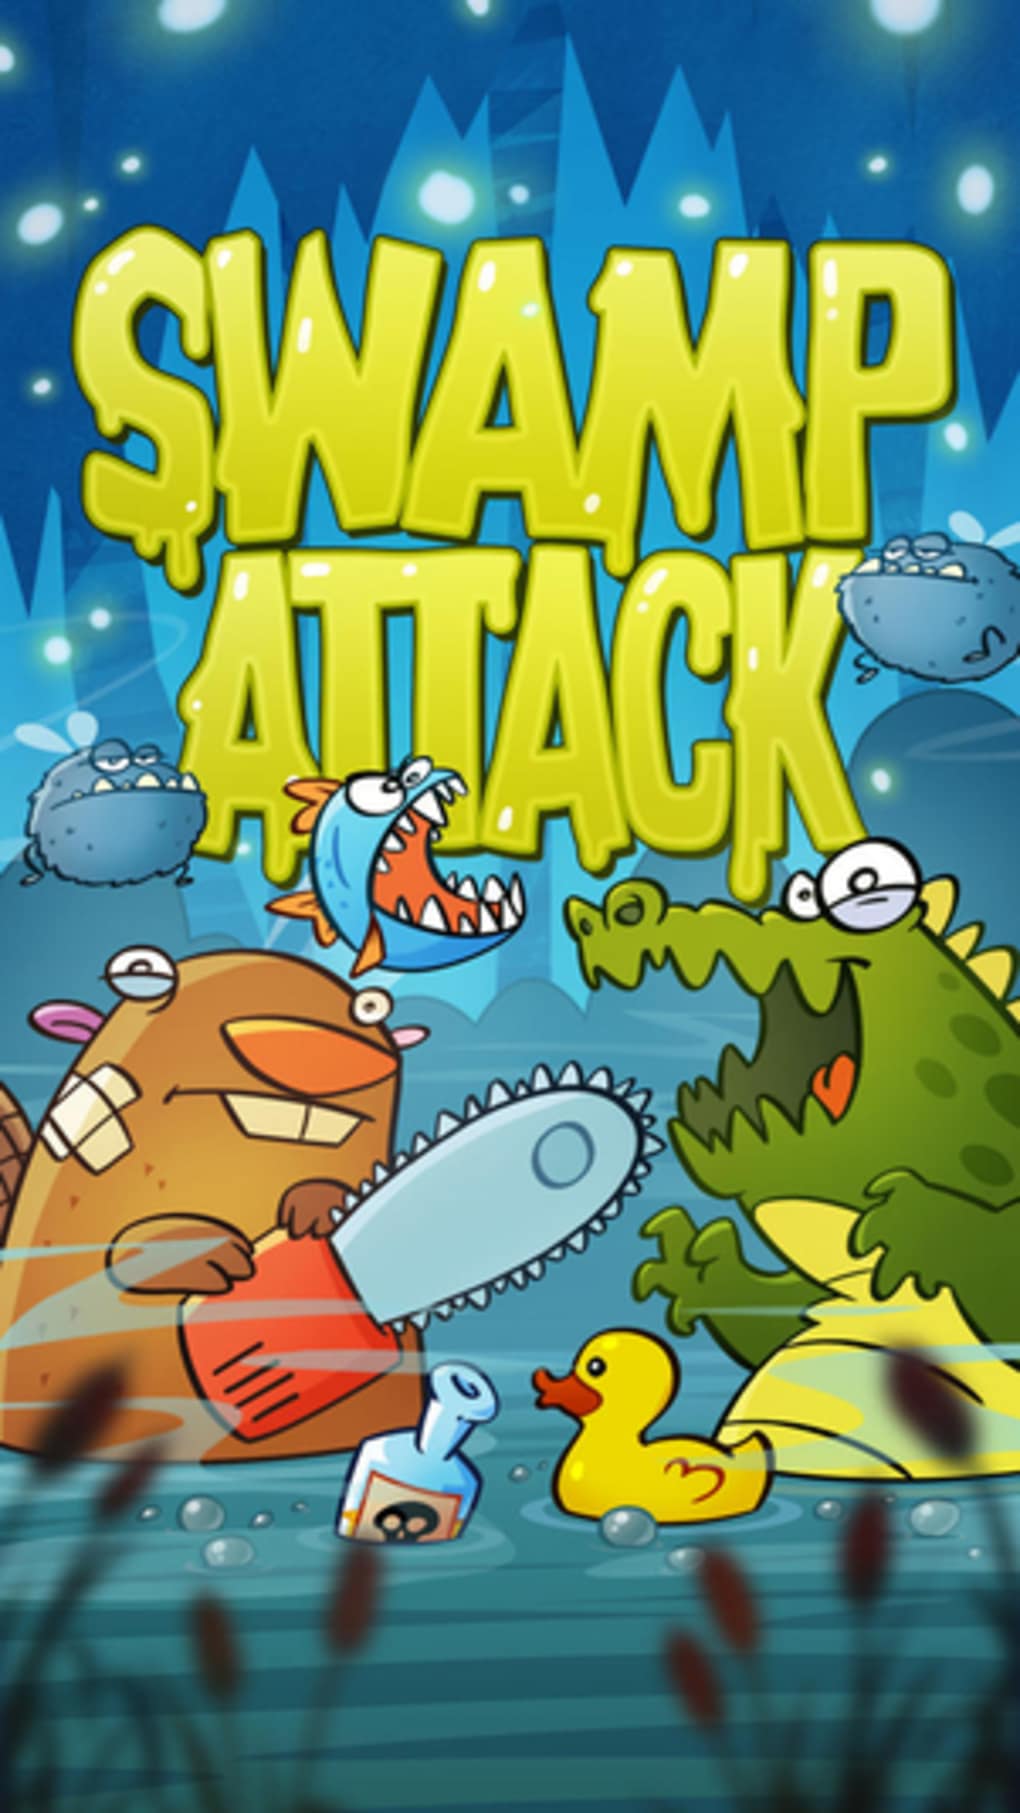 Swamp Attack 2 instal the new version for windows